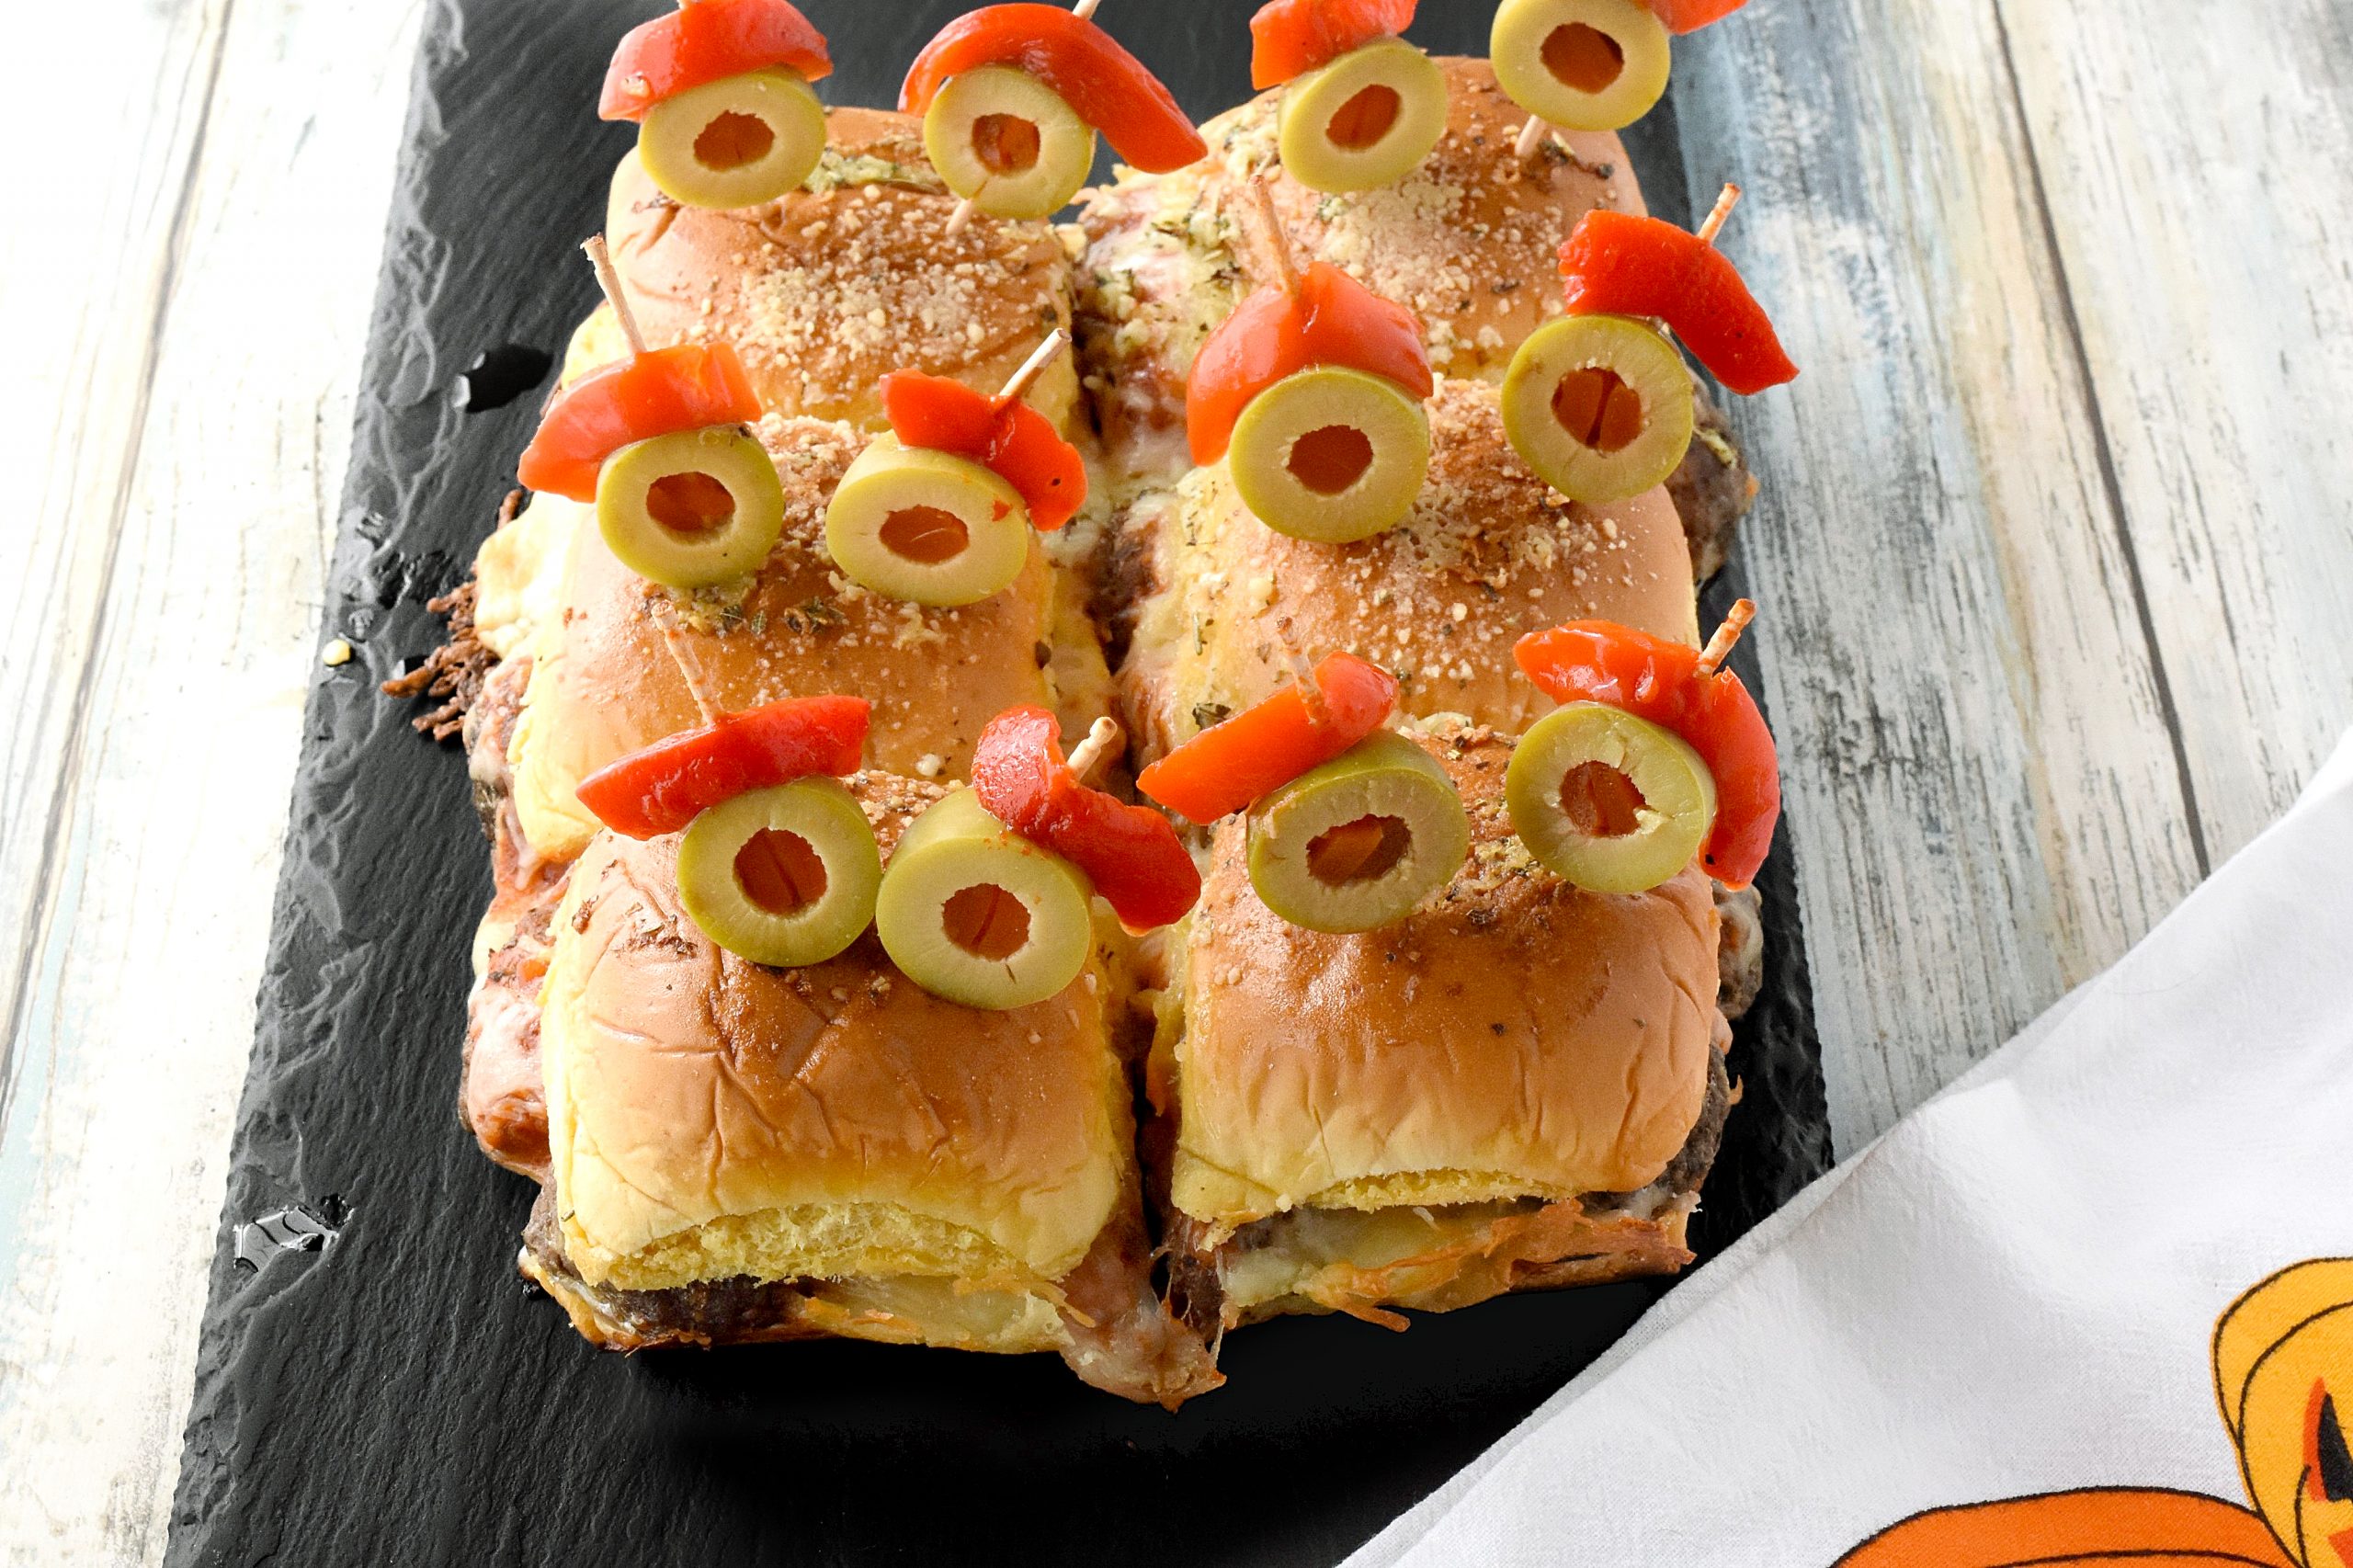 Mini Monster Meatball Sliders are not only fun to make, but fun to eat! Packed with meatballs, cheese, and sauce, these sliders are on the table in no time. #HalloweenTreatsWeek